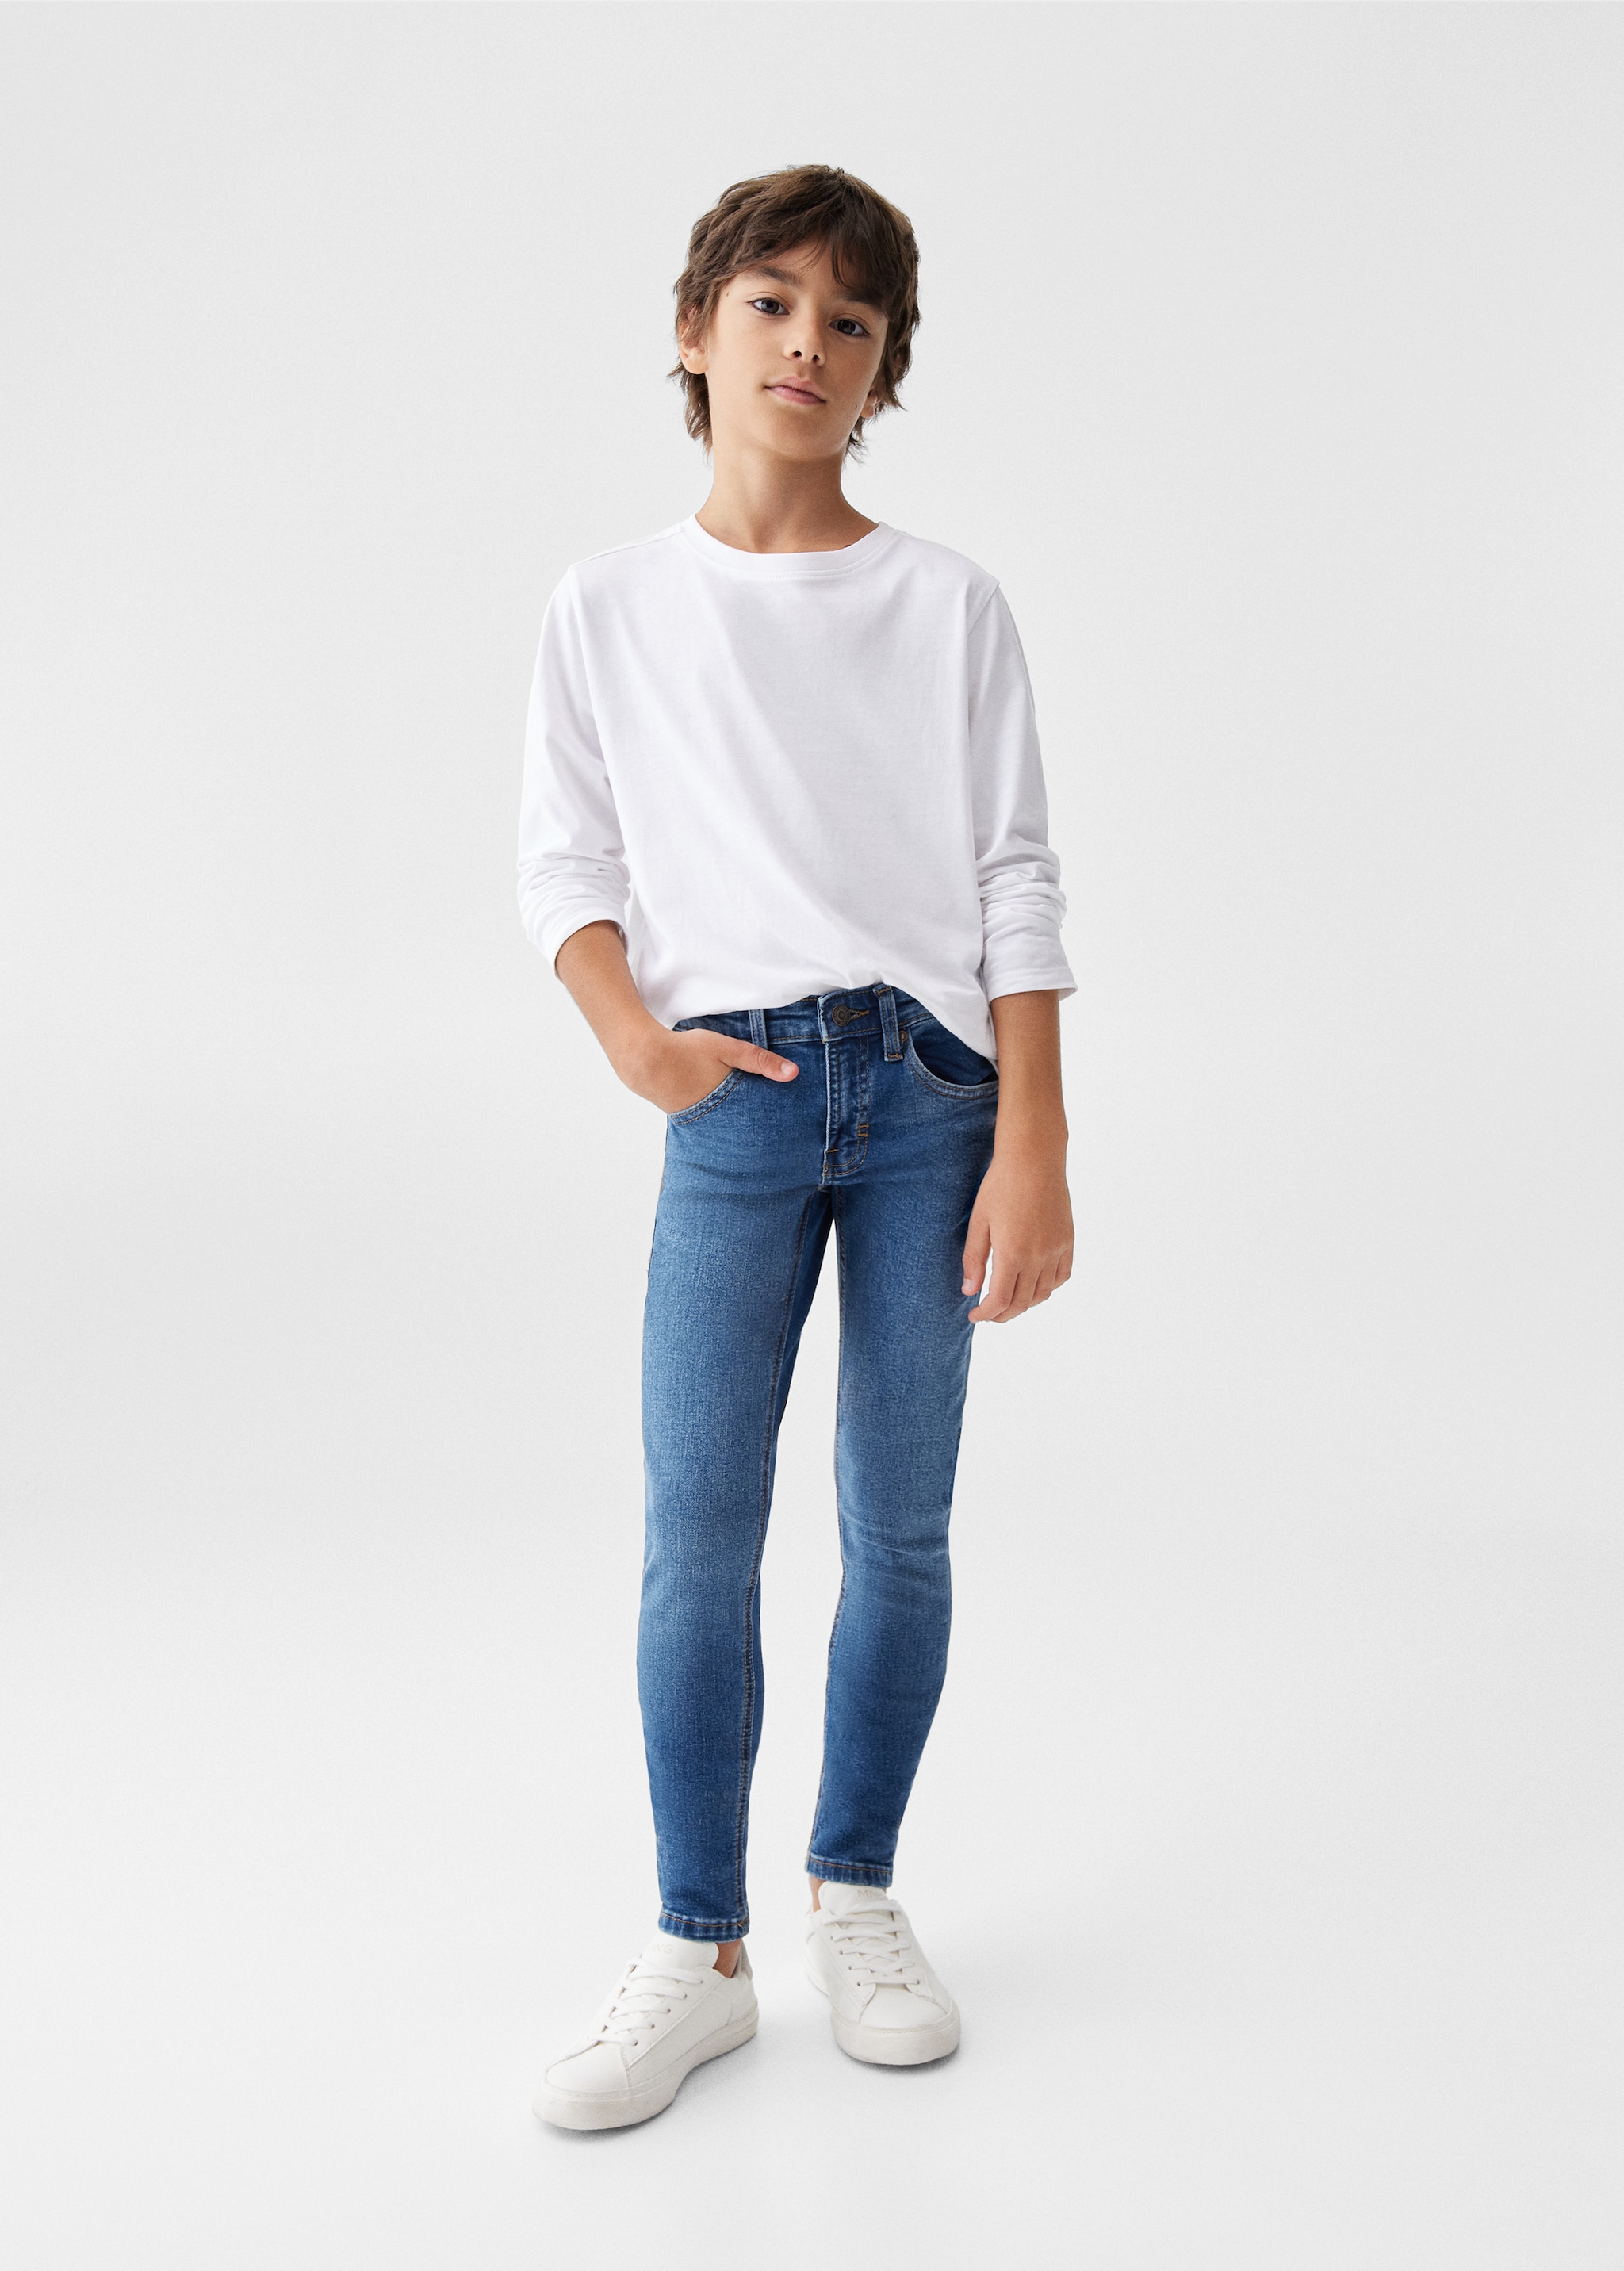 Skinny jeans - Details of the article 1